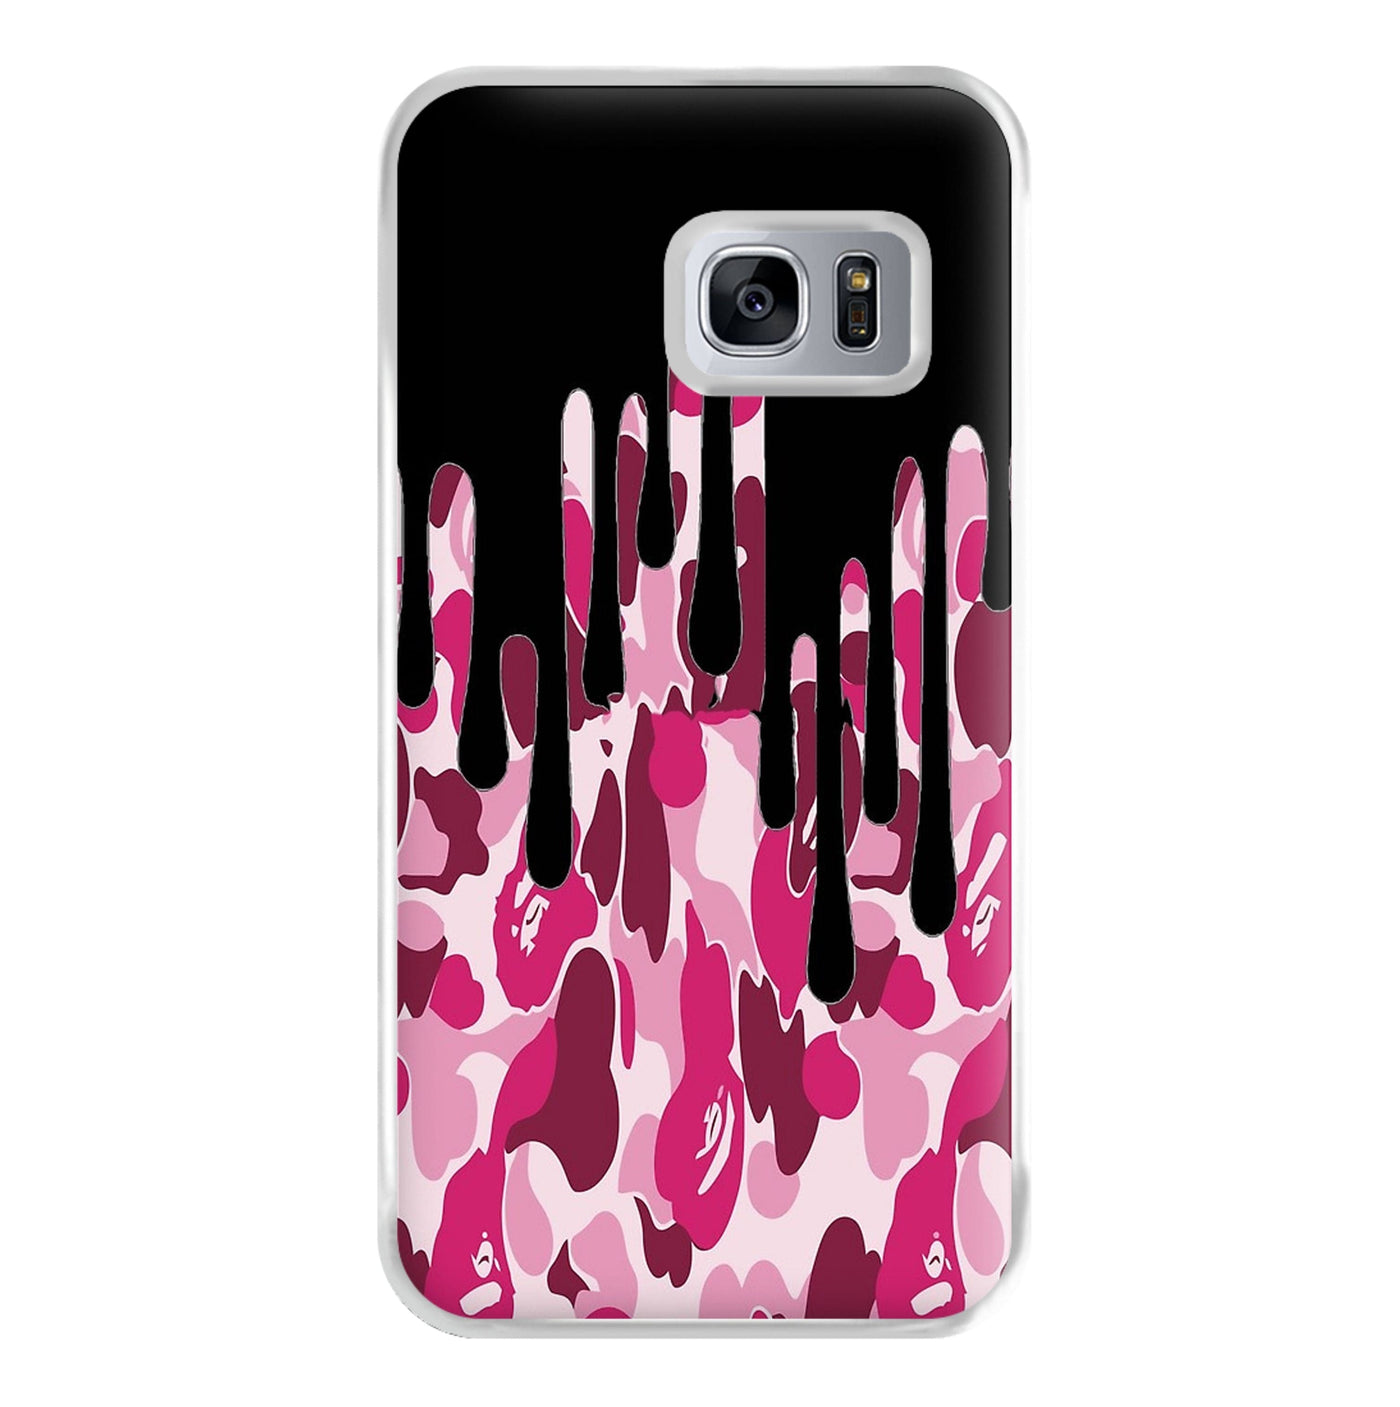 Kylie Jenner - Black & Pink Camo Dripping Cosmetics Phone Case